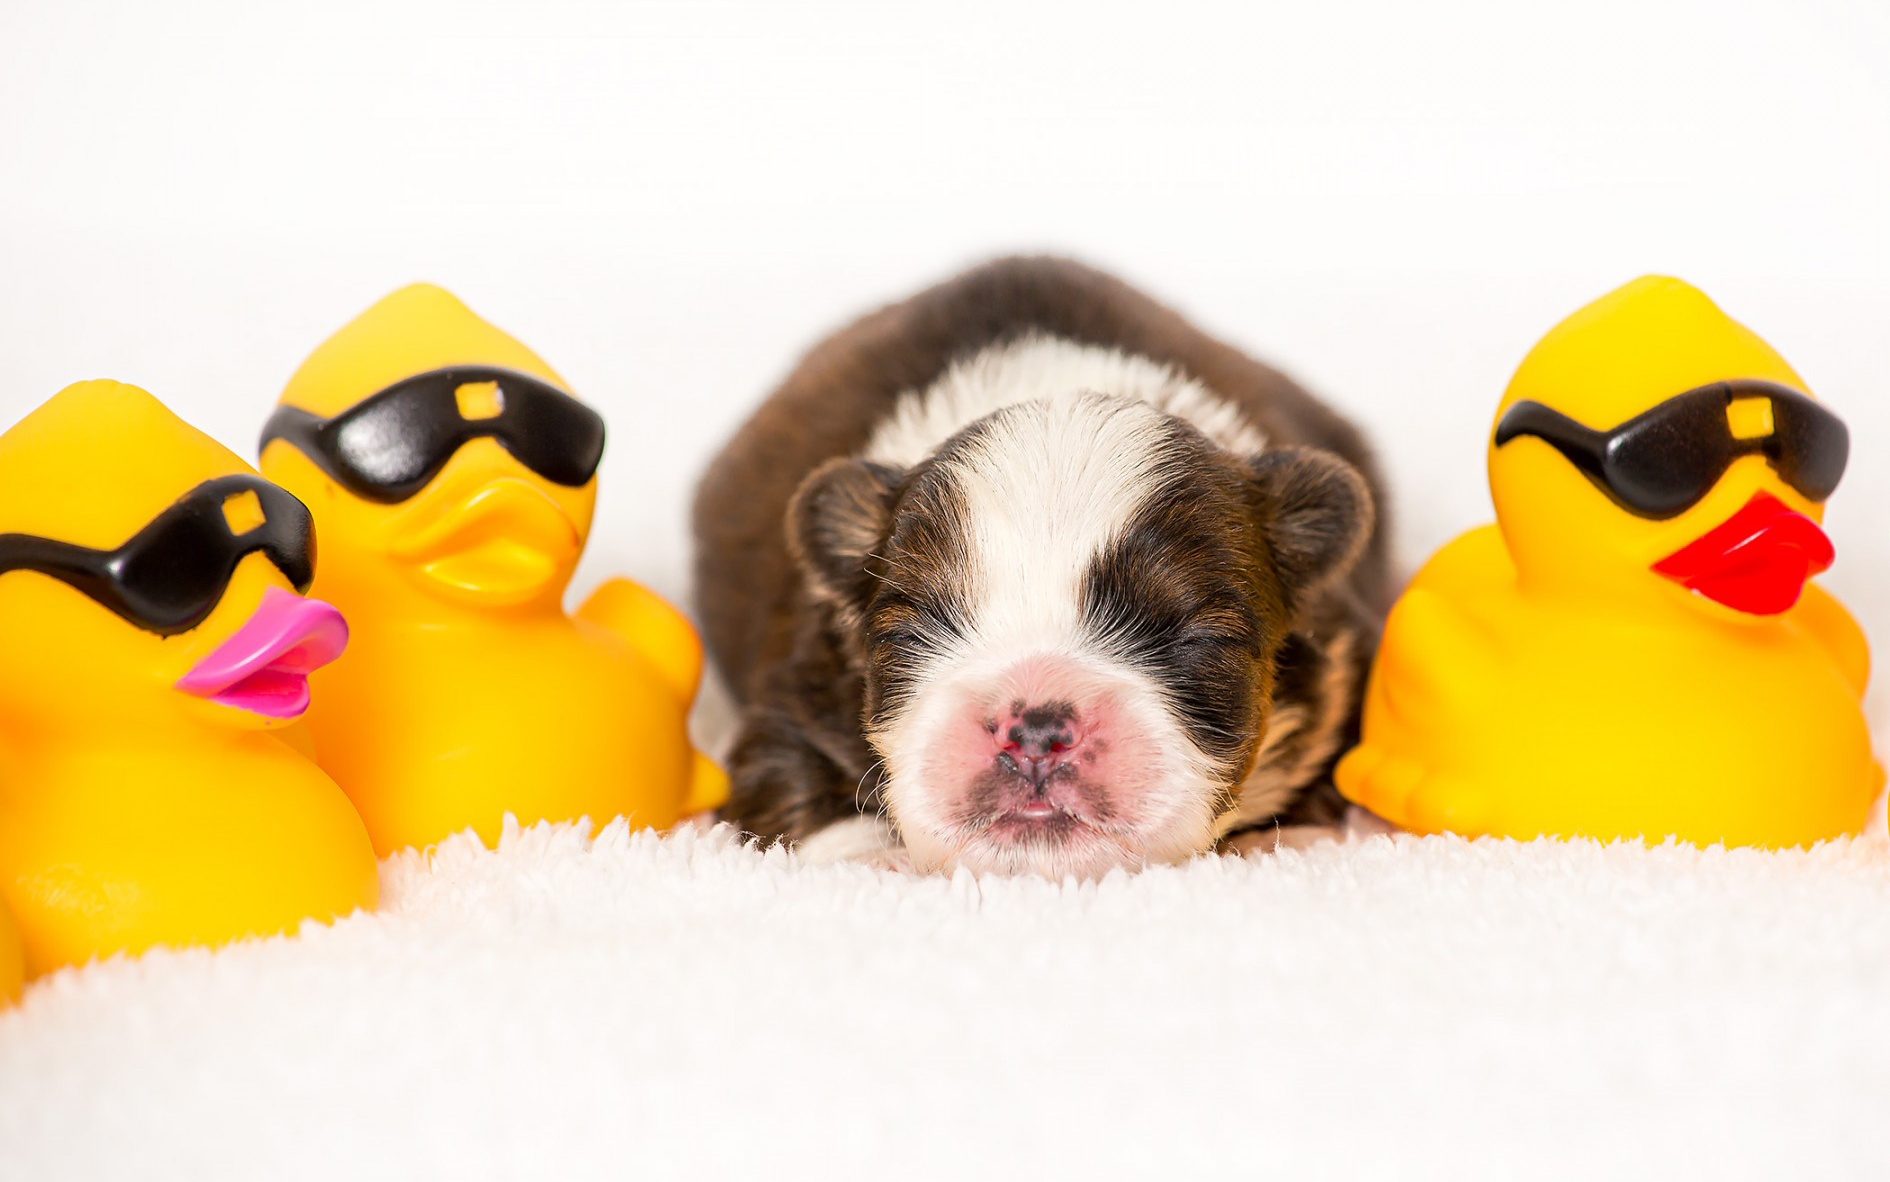 young puppy sleeping next to rubber ducks